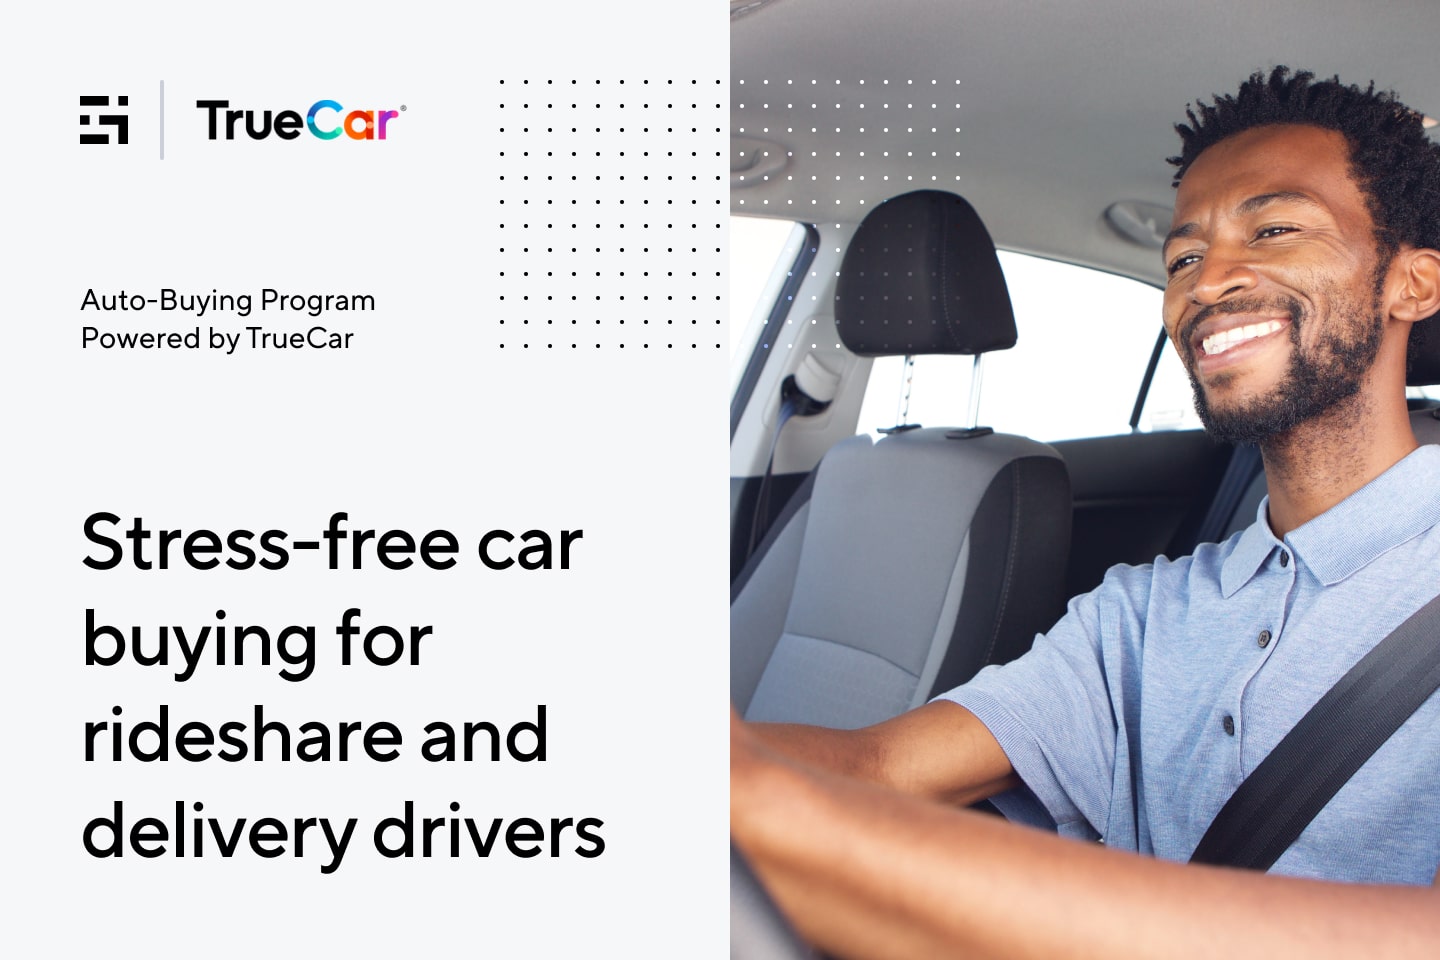 Stress-free car buying for rideshare and delivery drivers. Auto-Buying Program powered by TrueCar.